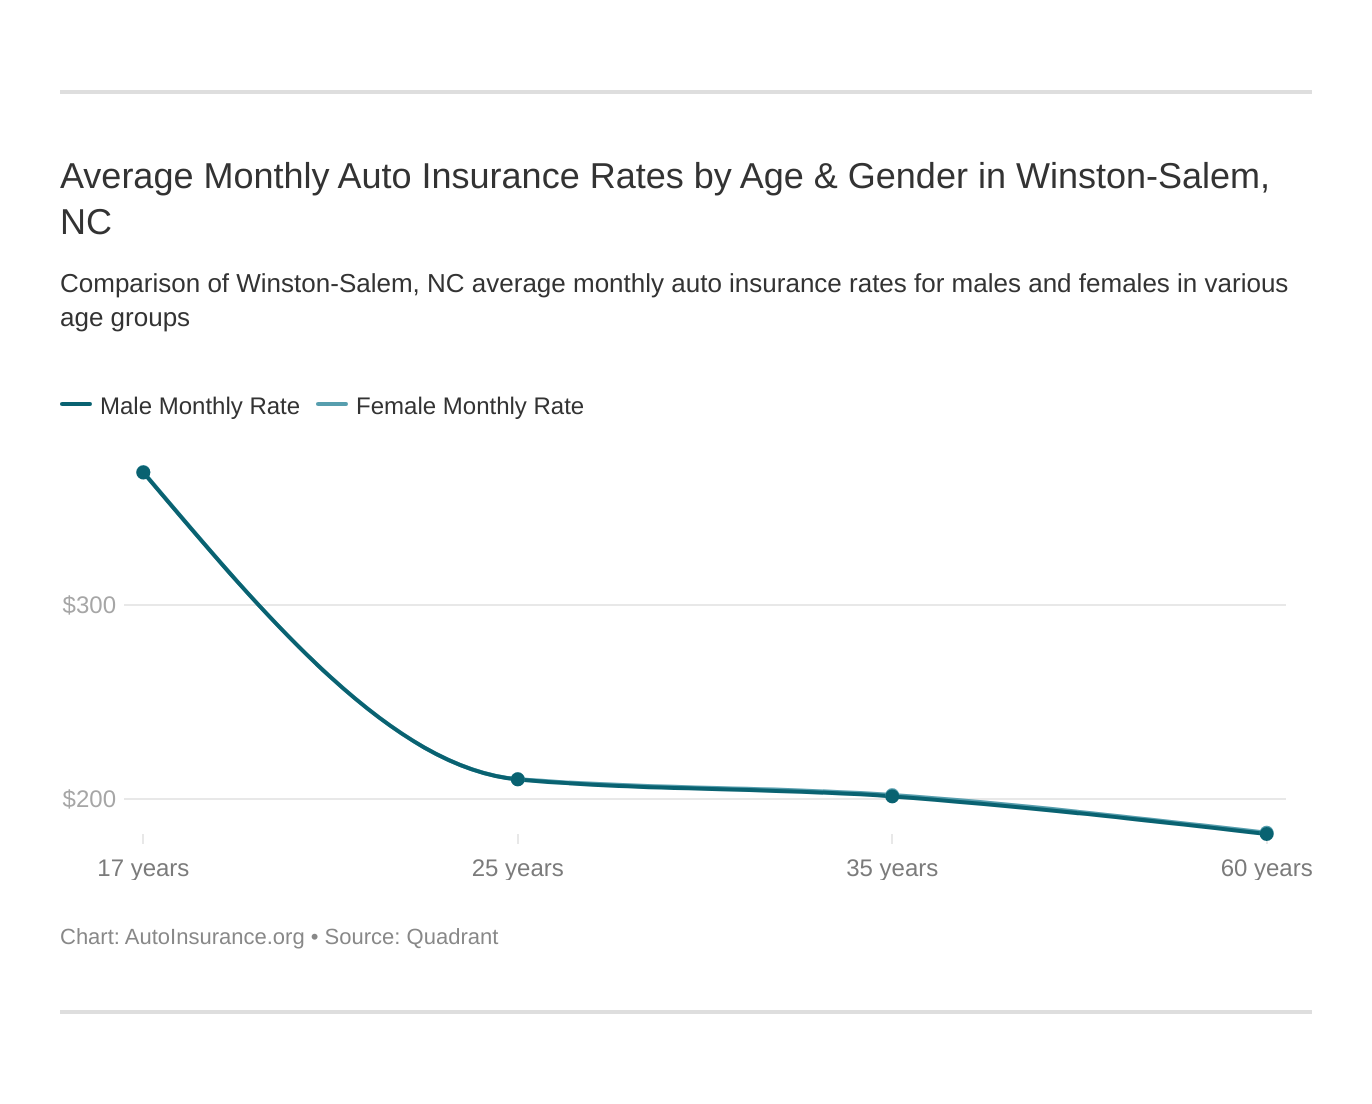 Average Monthly Auto Insurance Rates by Age & Gender in Winston-Salem, NC